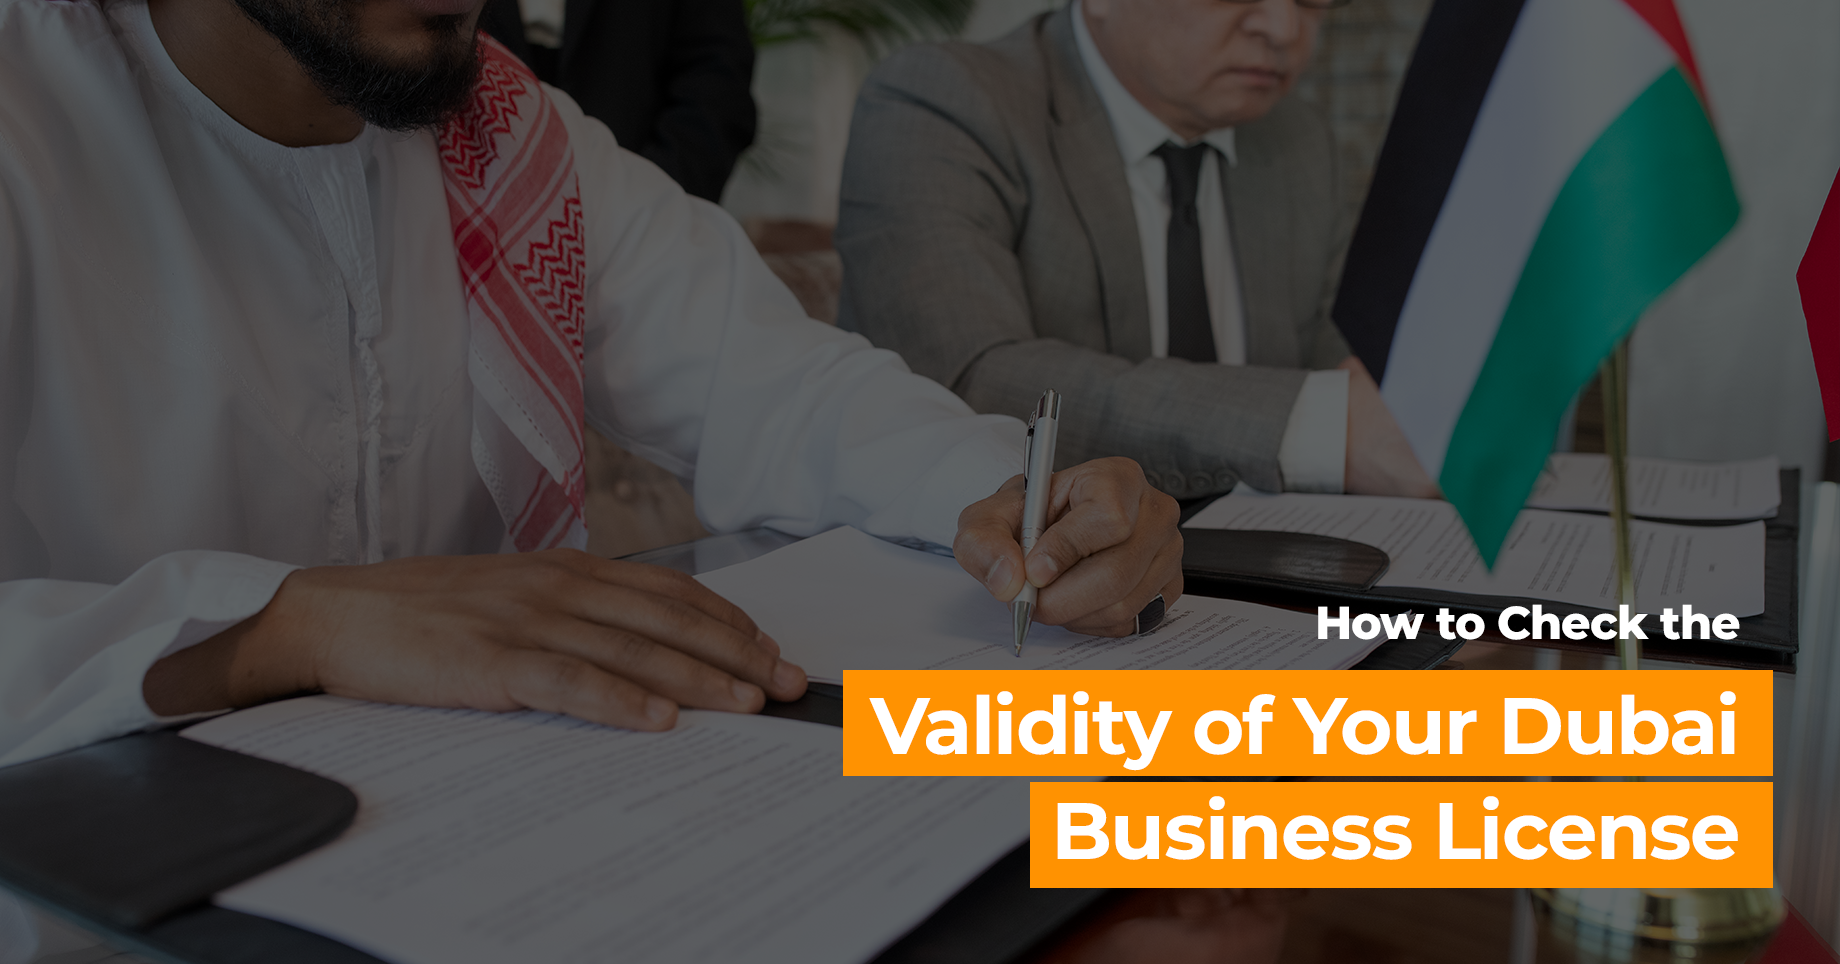 Validity of Your Dubai Business License